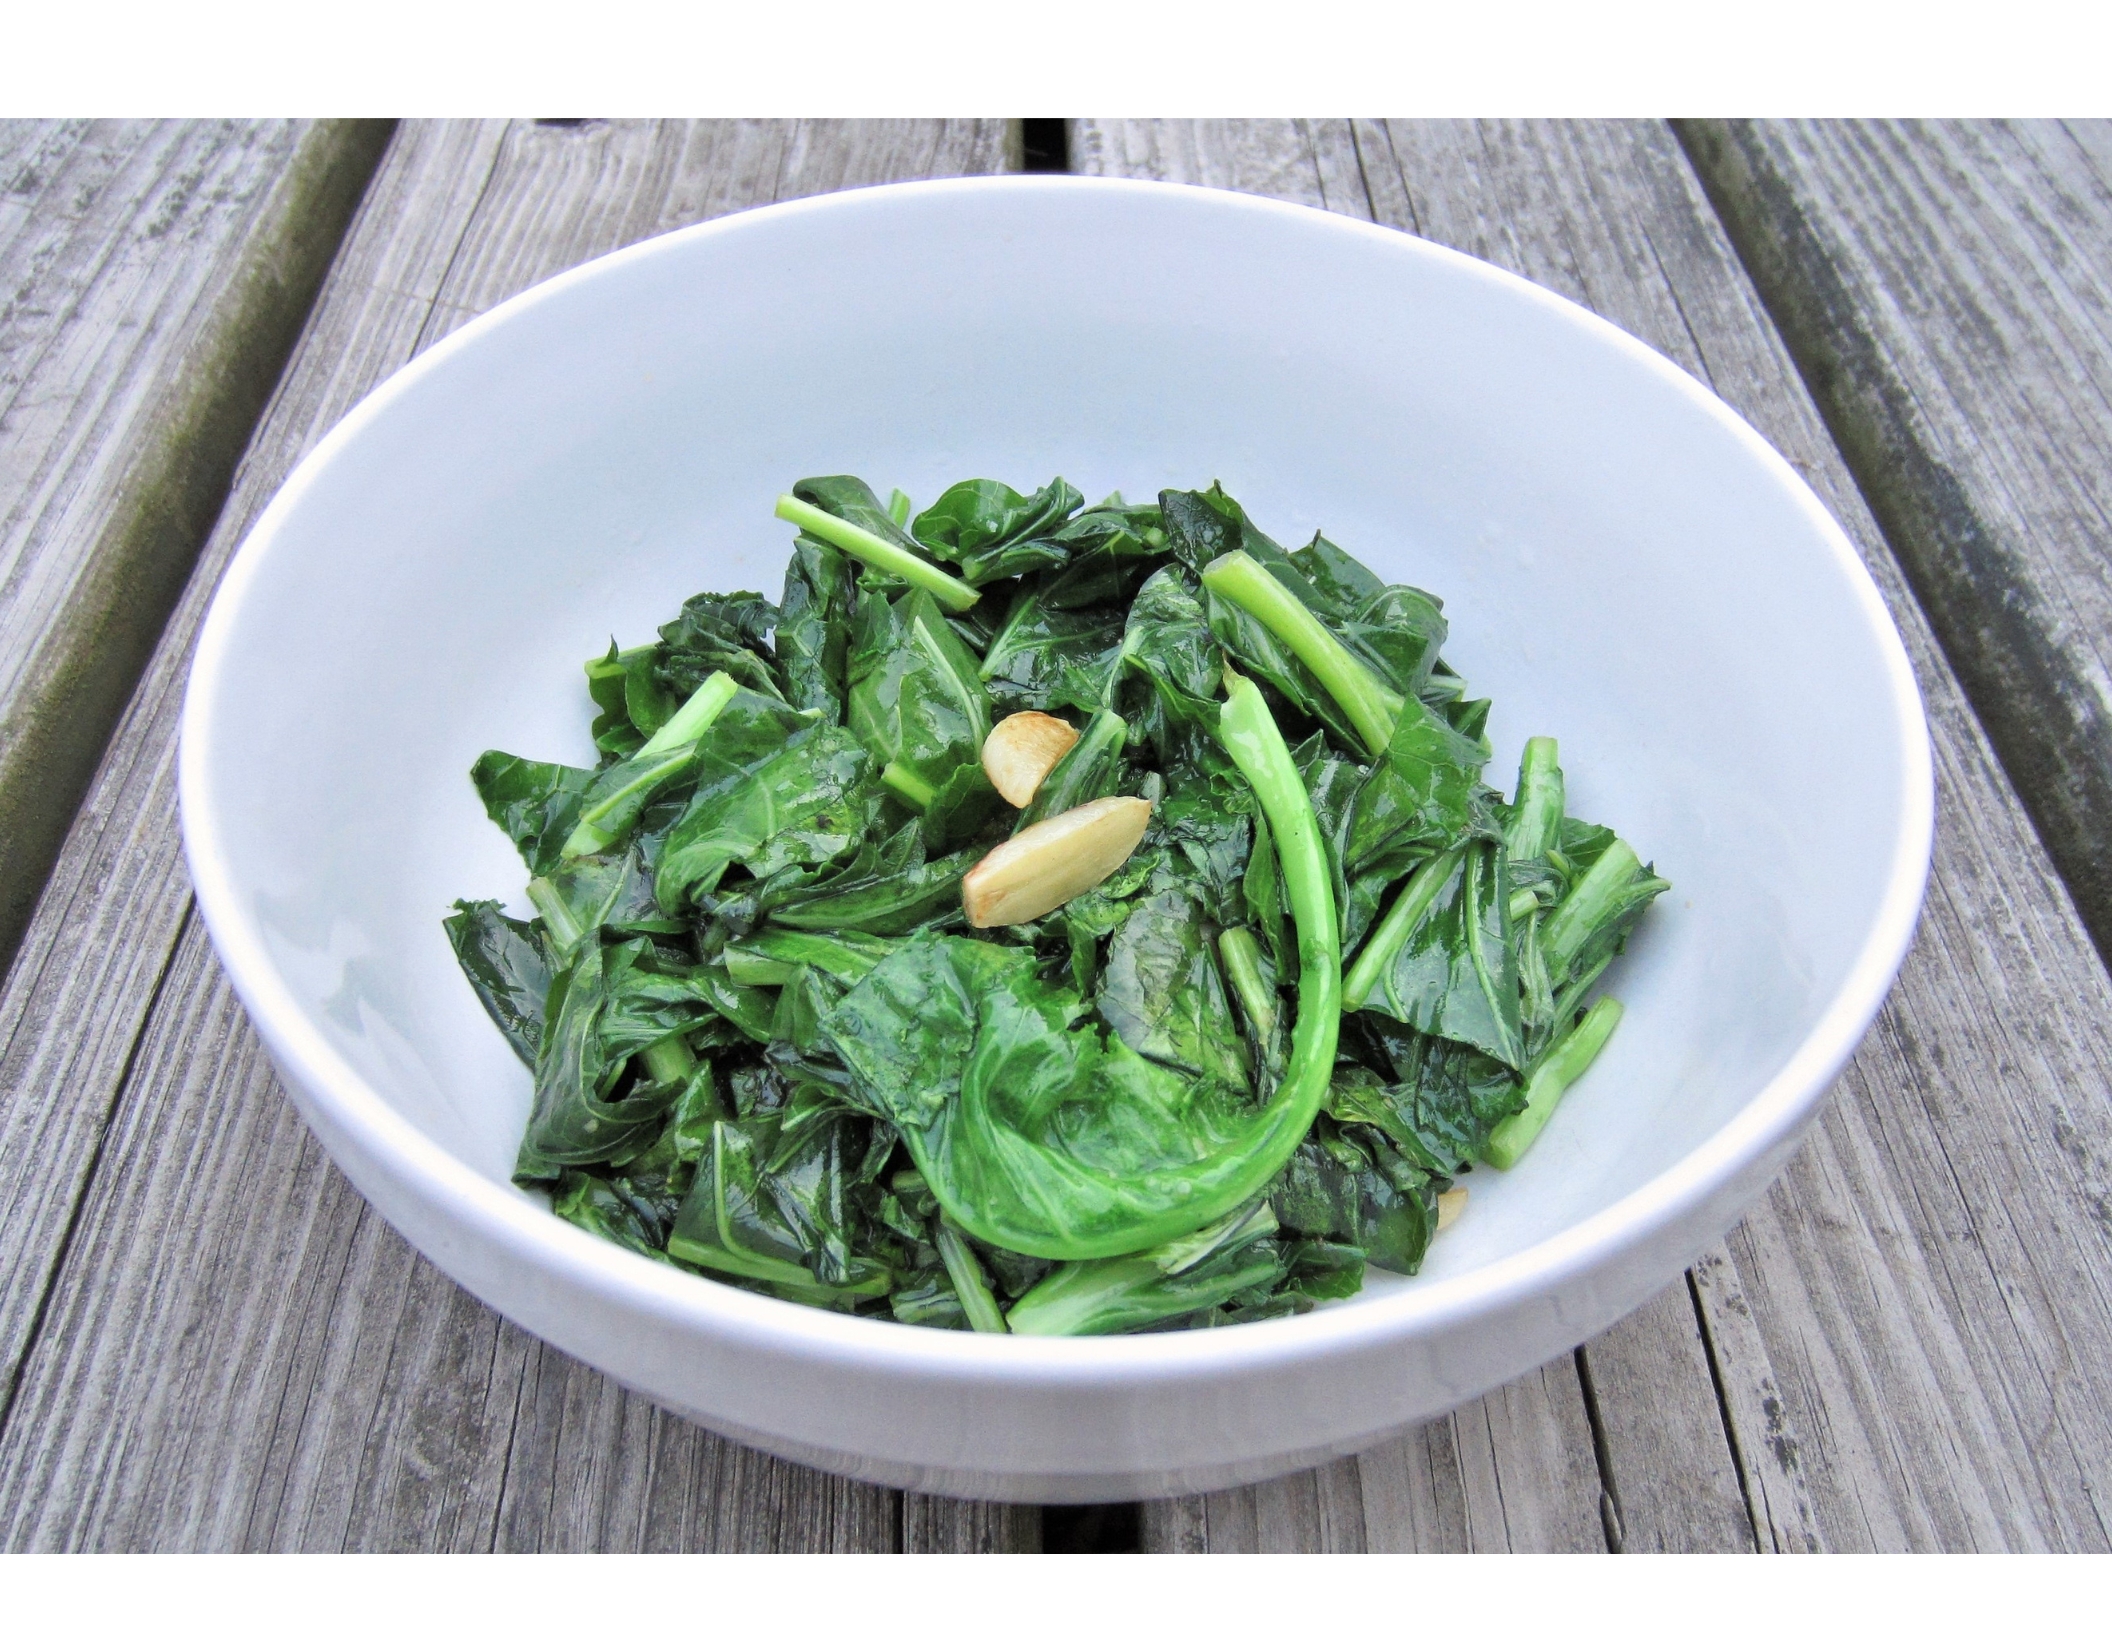 sautéed collard greens in a white bowl on a wooden table 